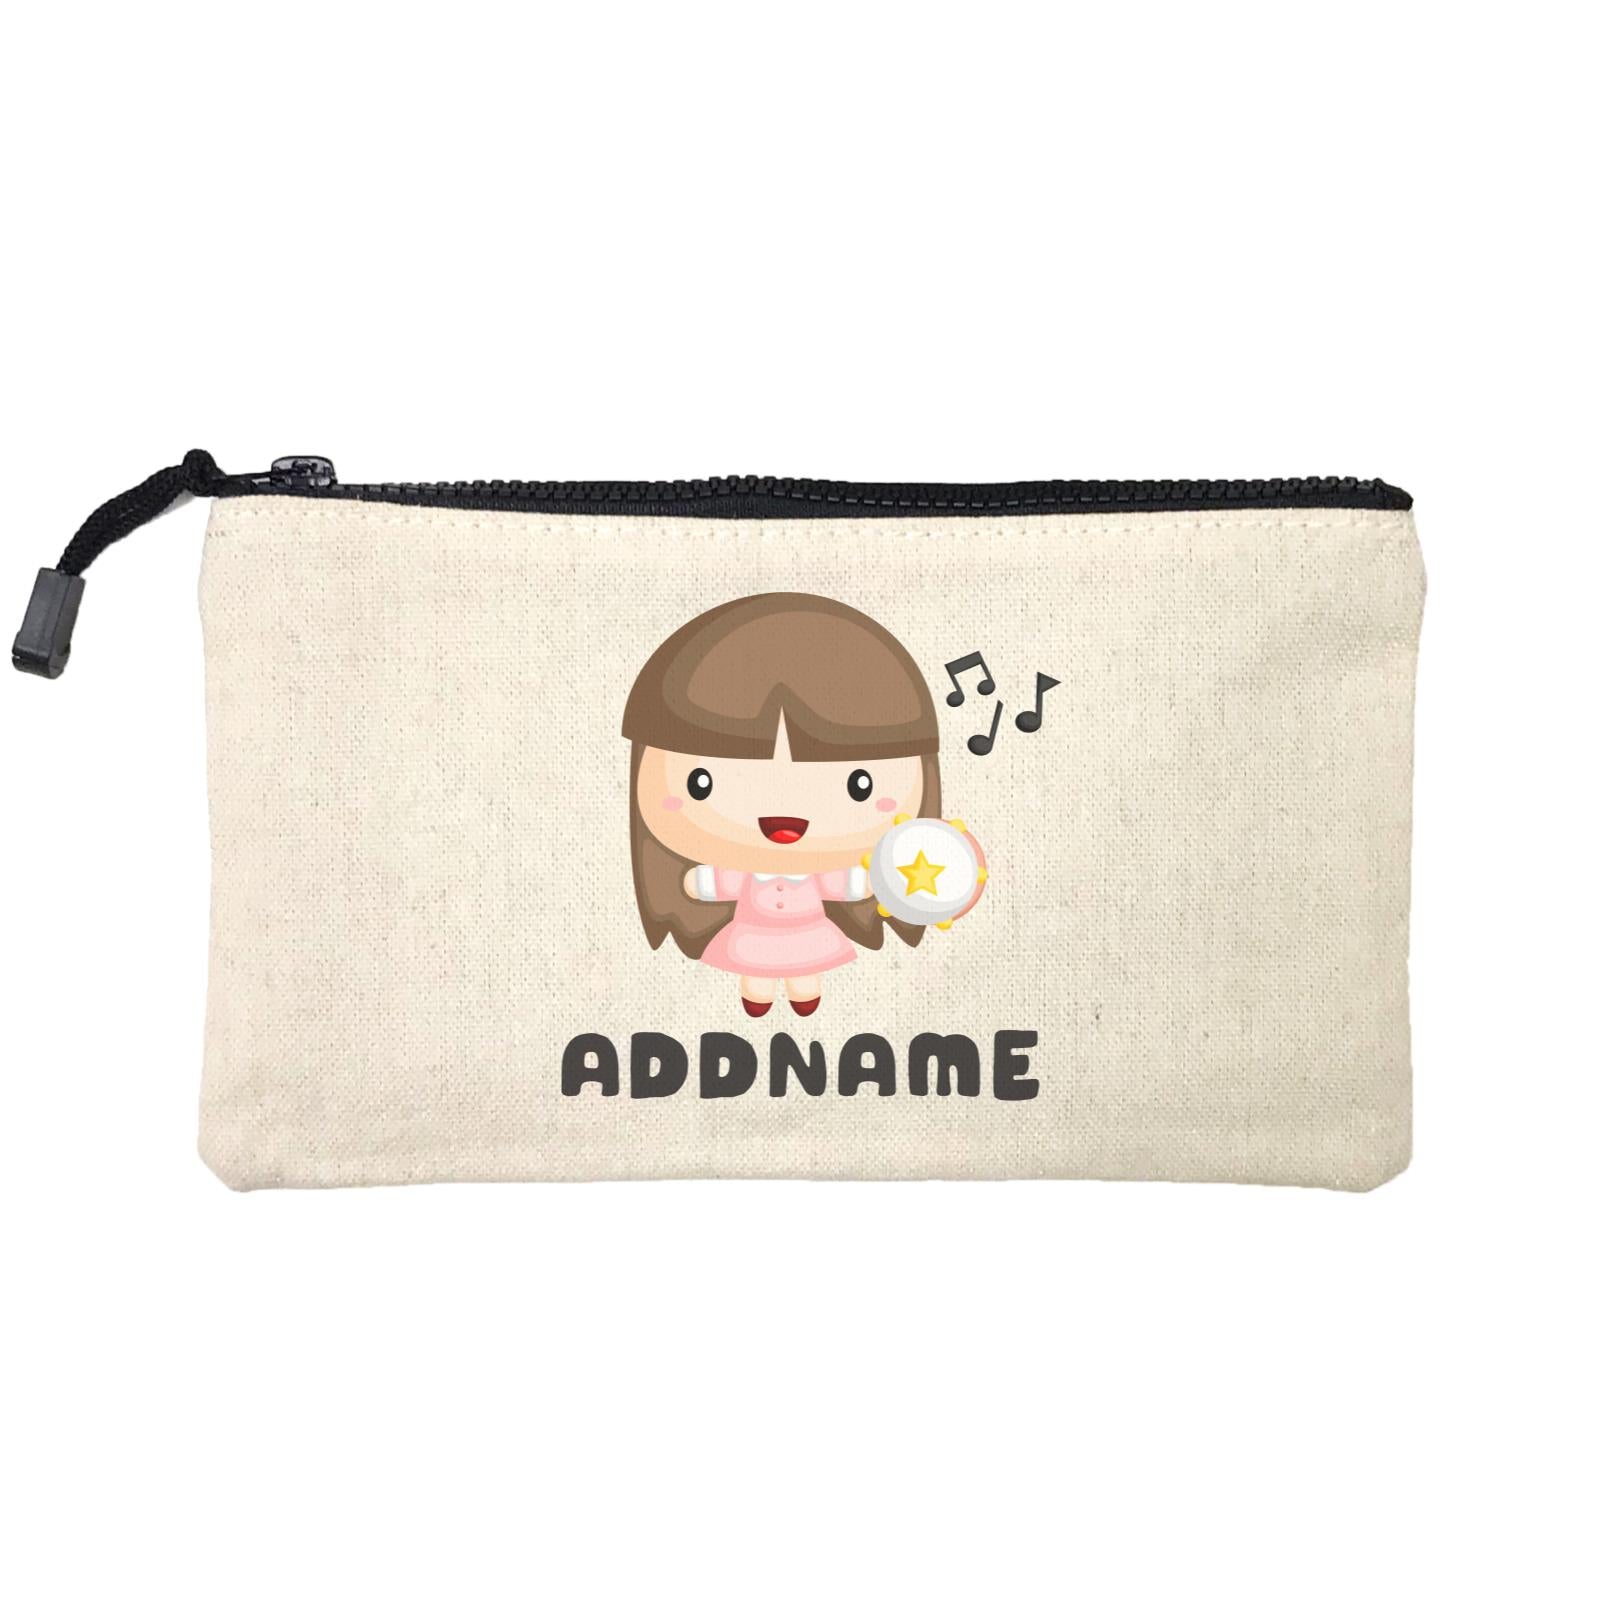 Birthday Music Band Girl Playing Tambourine Addname Mini Accessories Stationery Pouch